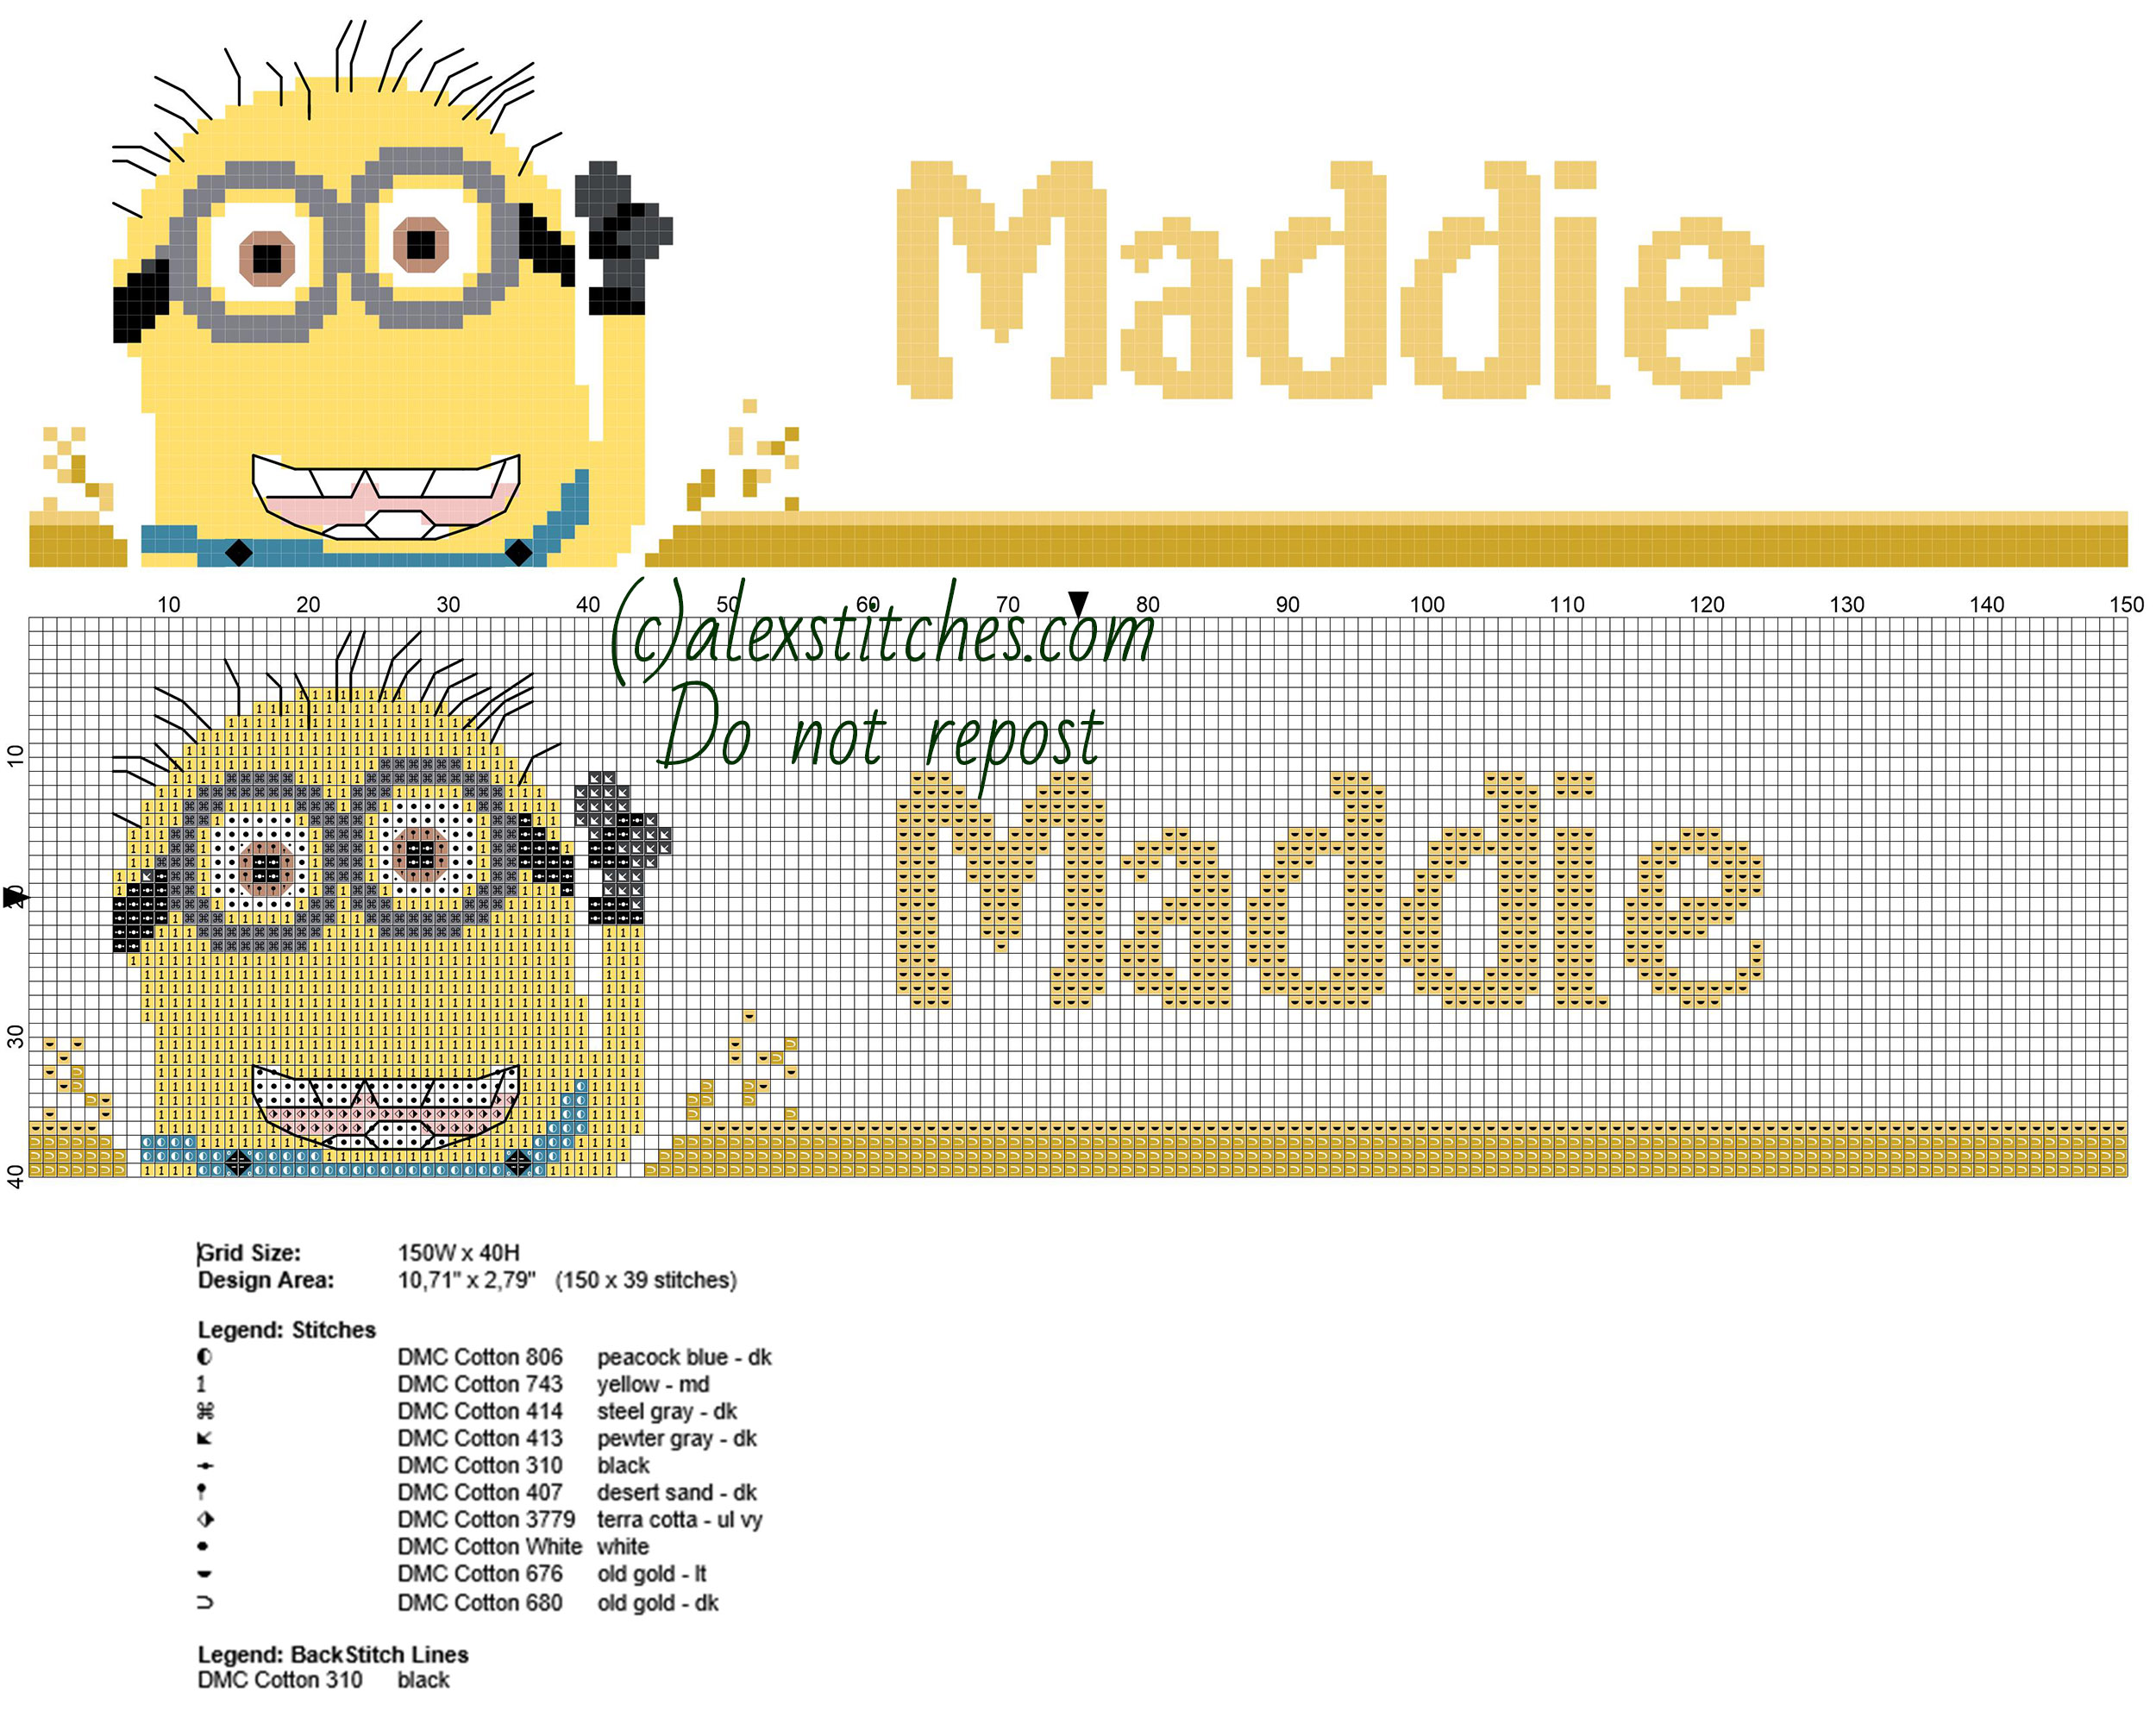 Maddie cross stitch name with Minion from Despicable Me